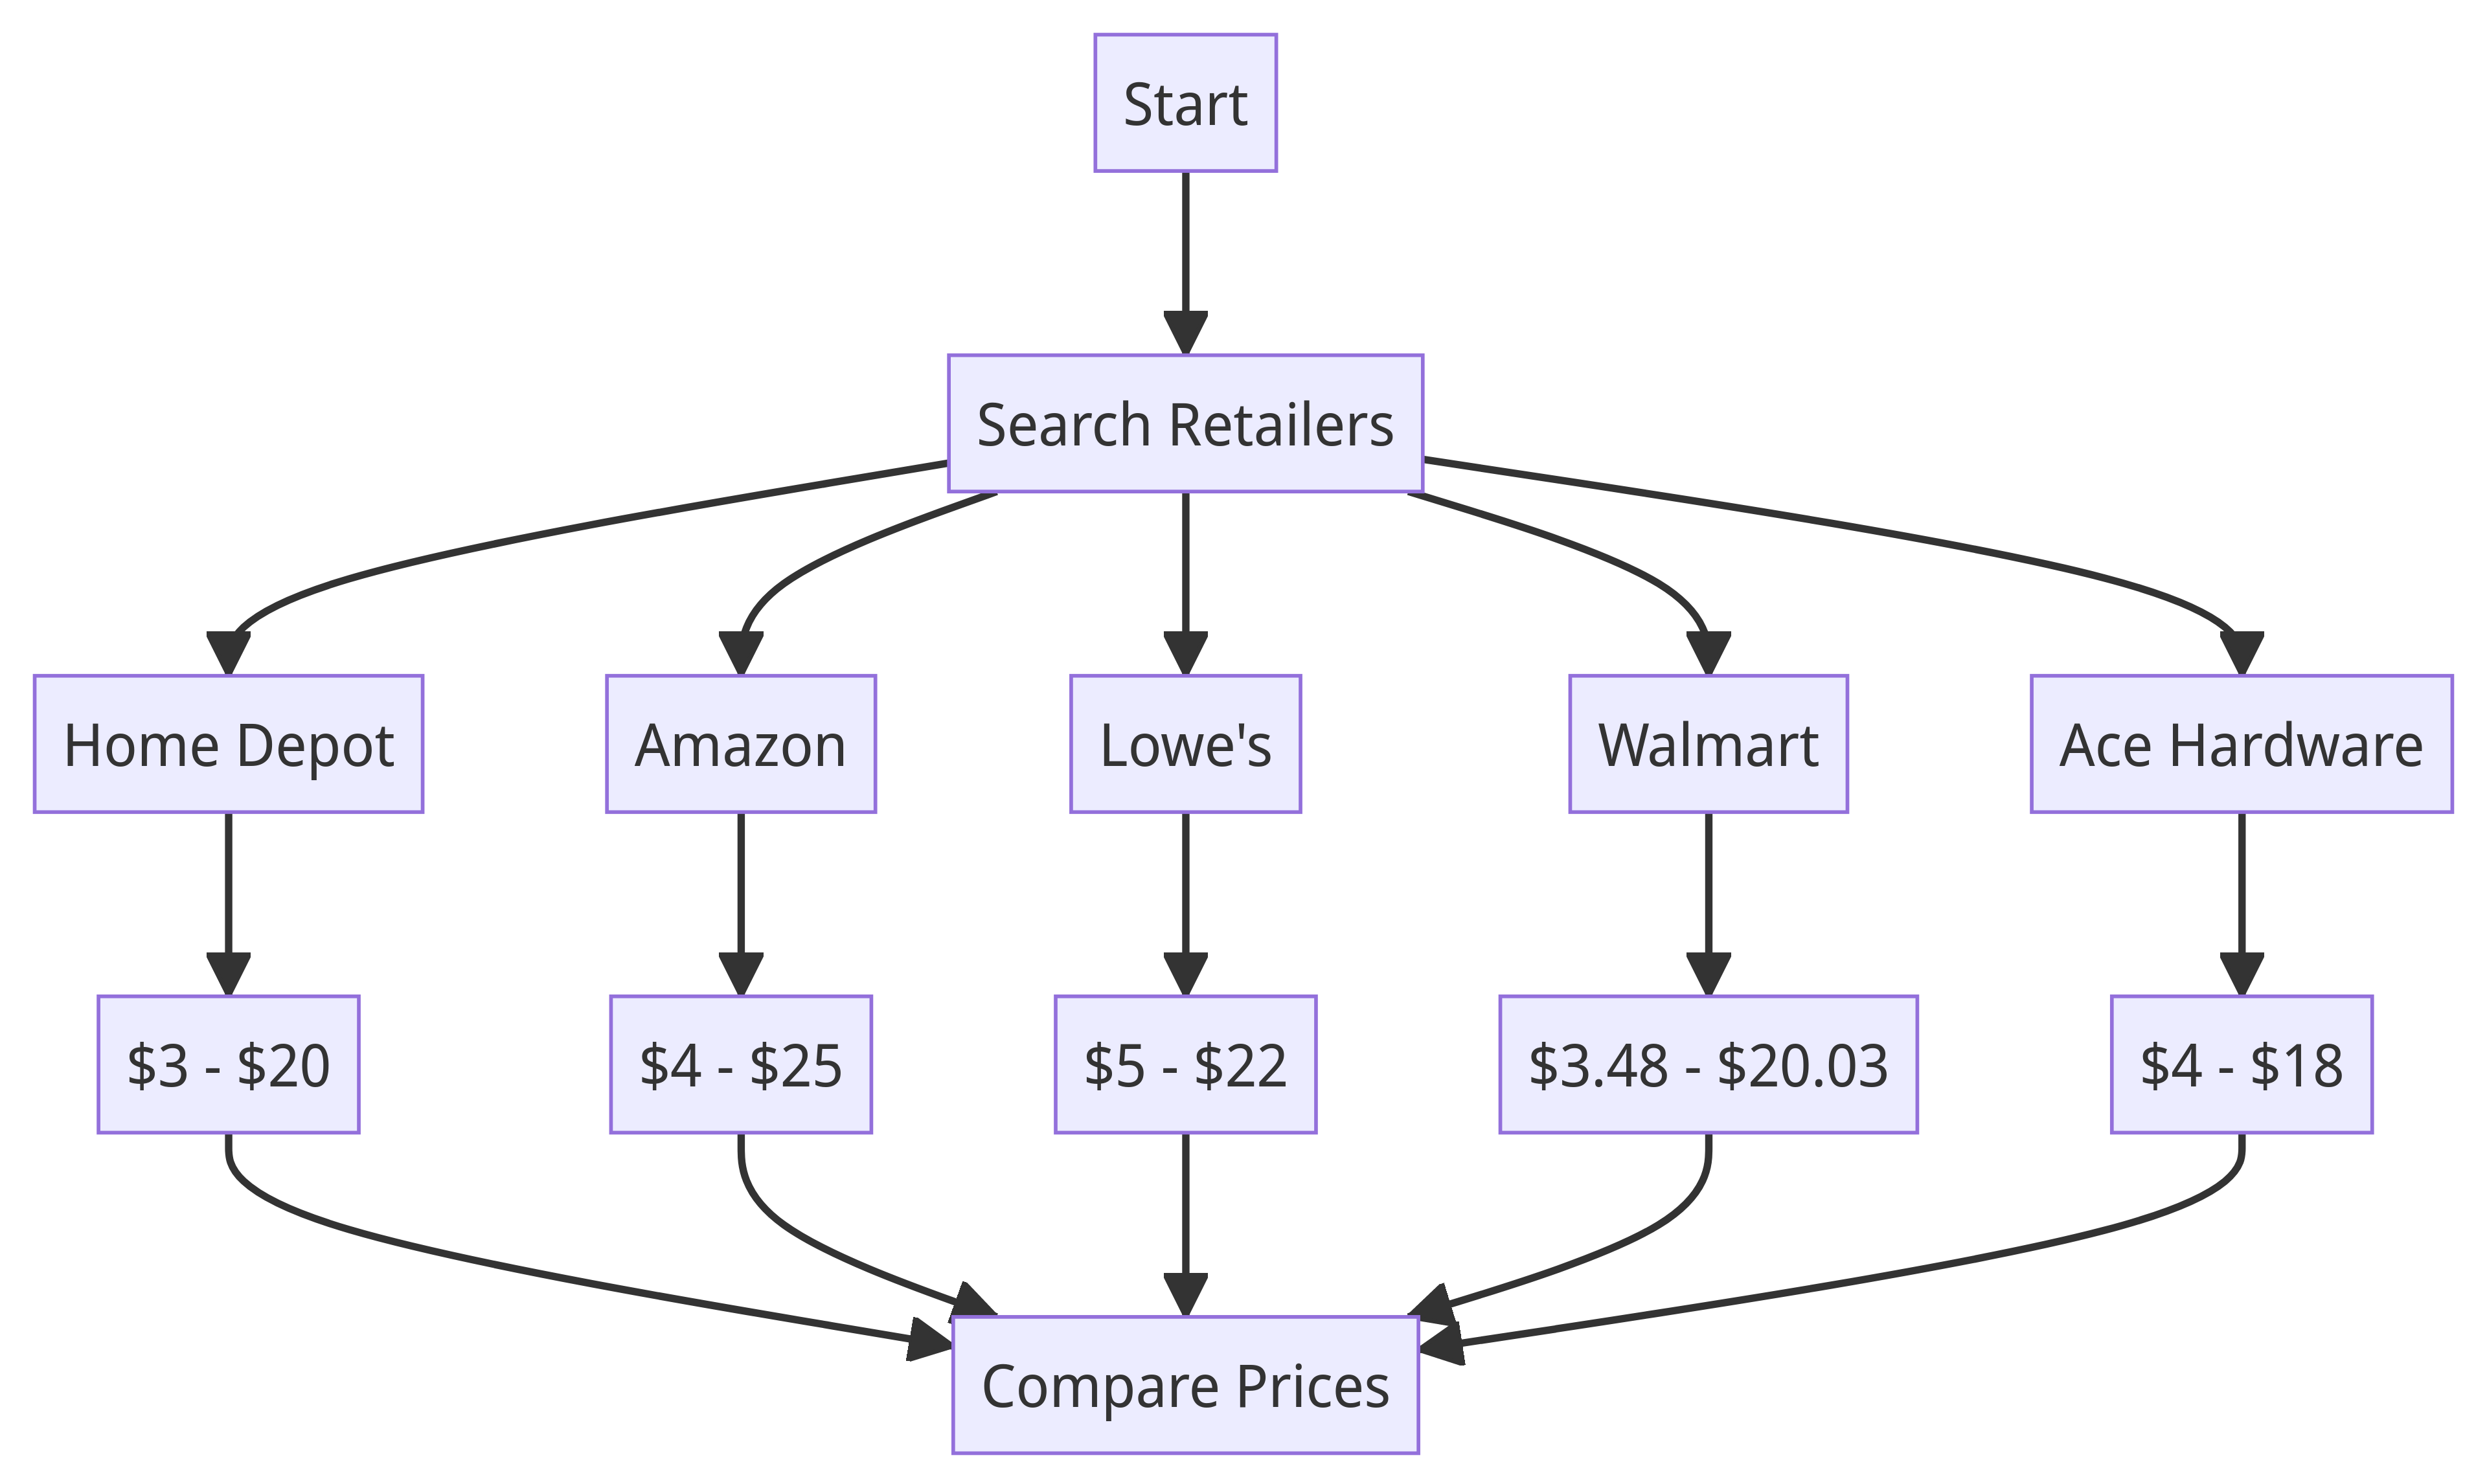 Flowchart of Retailers and Prices